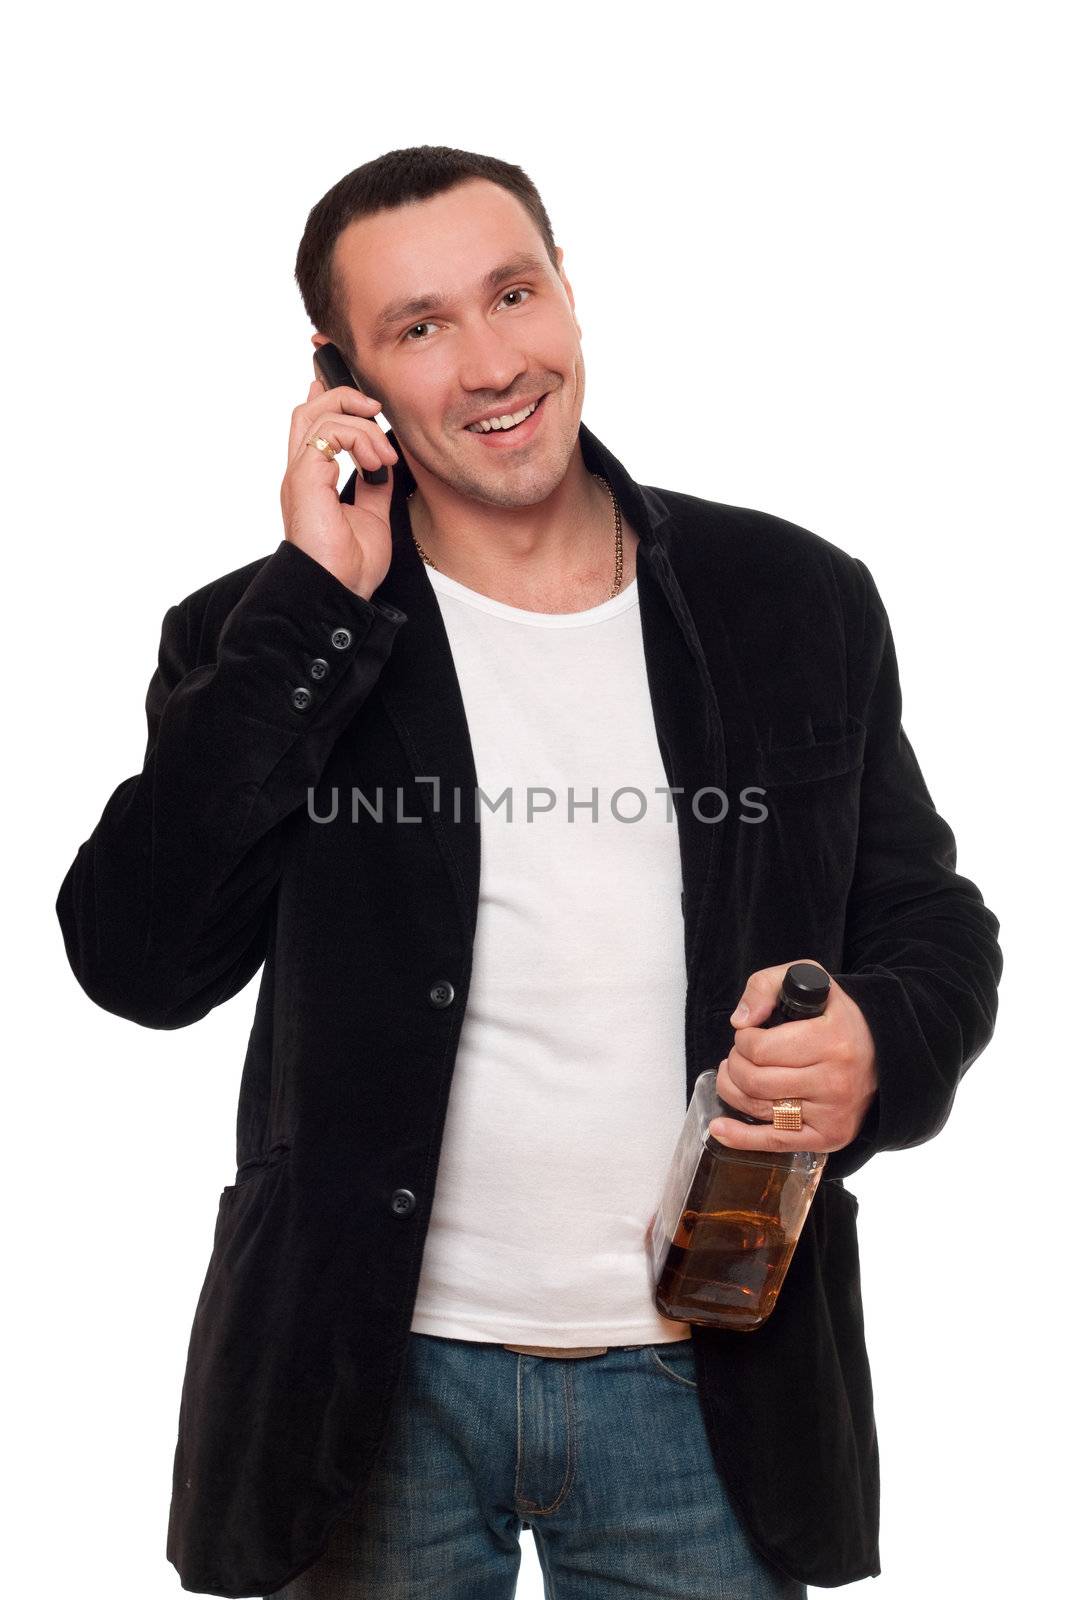 Smiling man with a phone and bottle of scotch by acidgrey